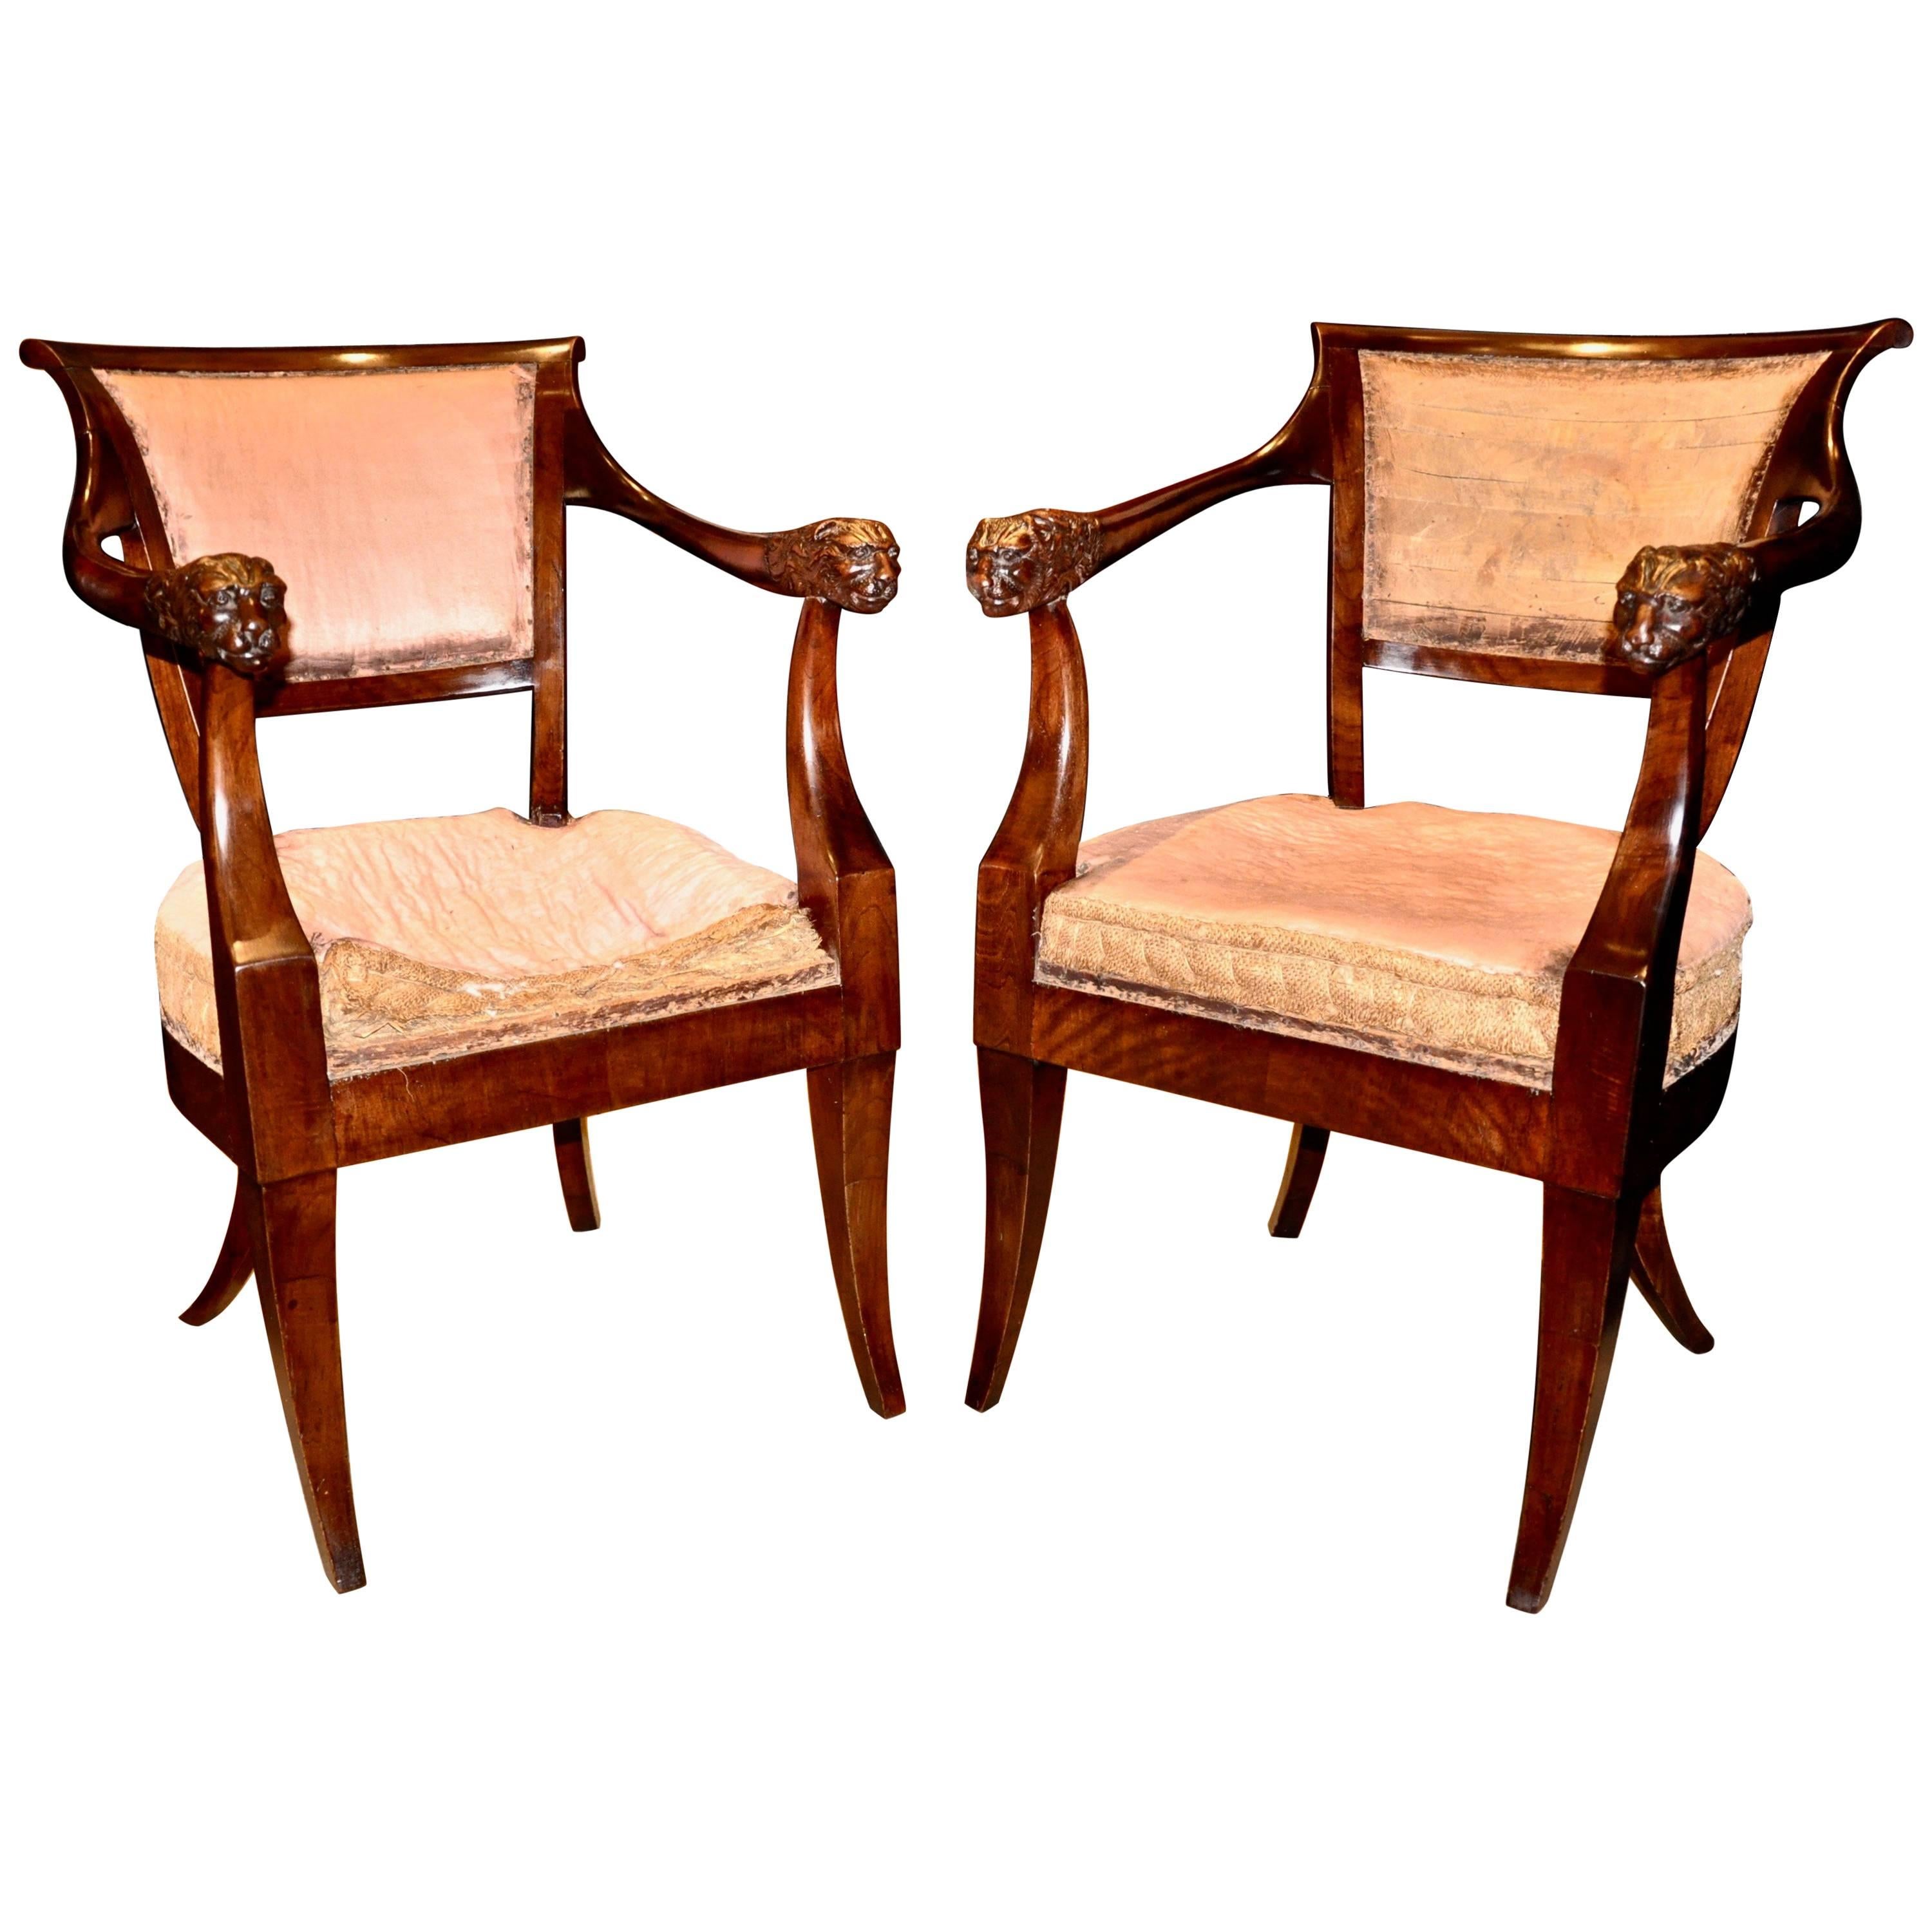 Pair of Period Russian or Austrian Neoclassical Walnut Chairs with Lion Motif For Sale